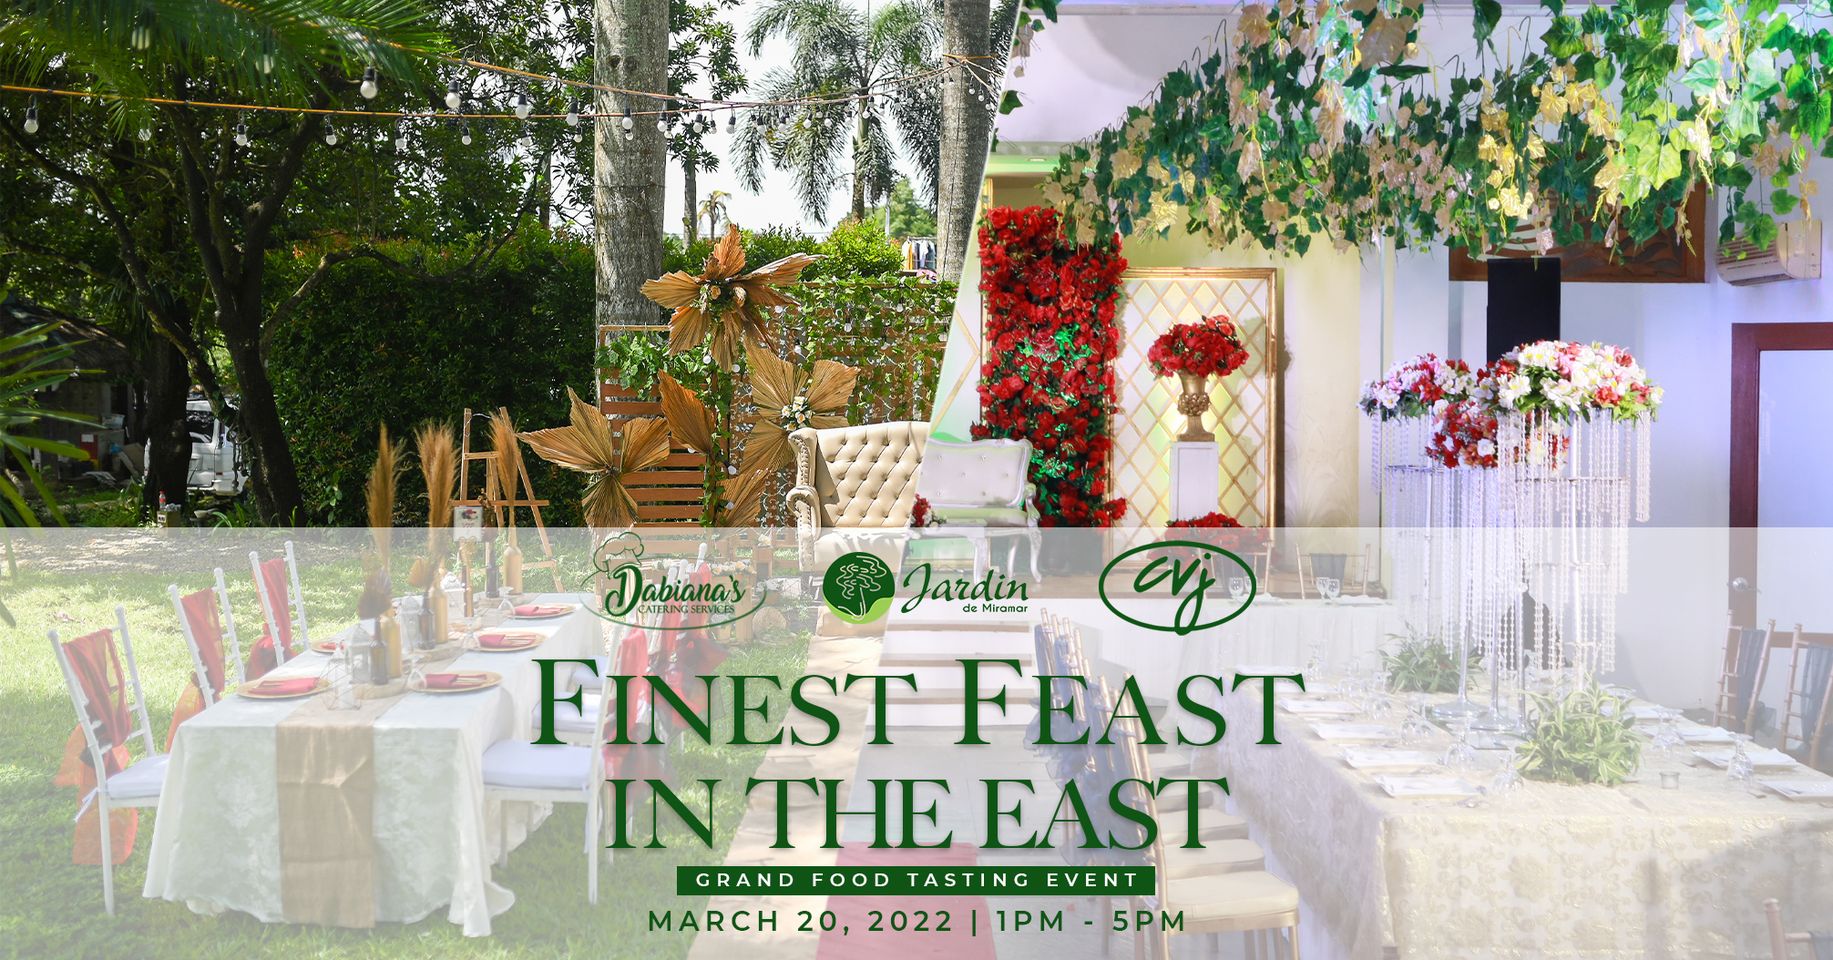 The Finest Feast in the East Grand Food Tasting Event by CVJ Catering and Dabianas' Catering